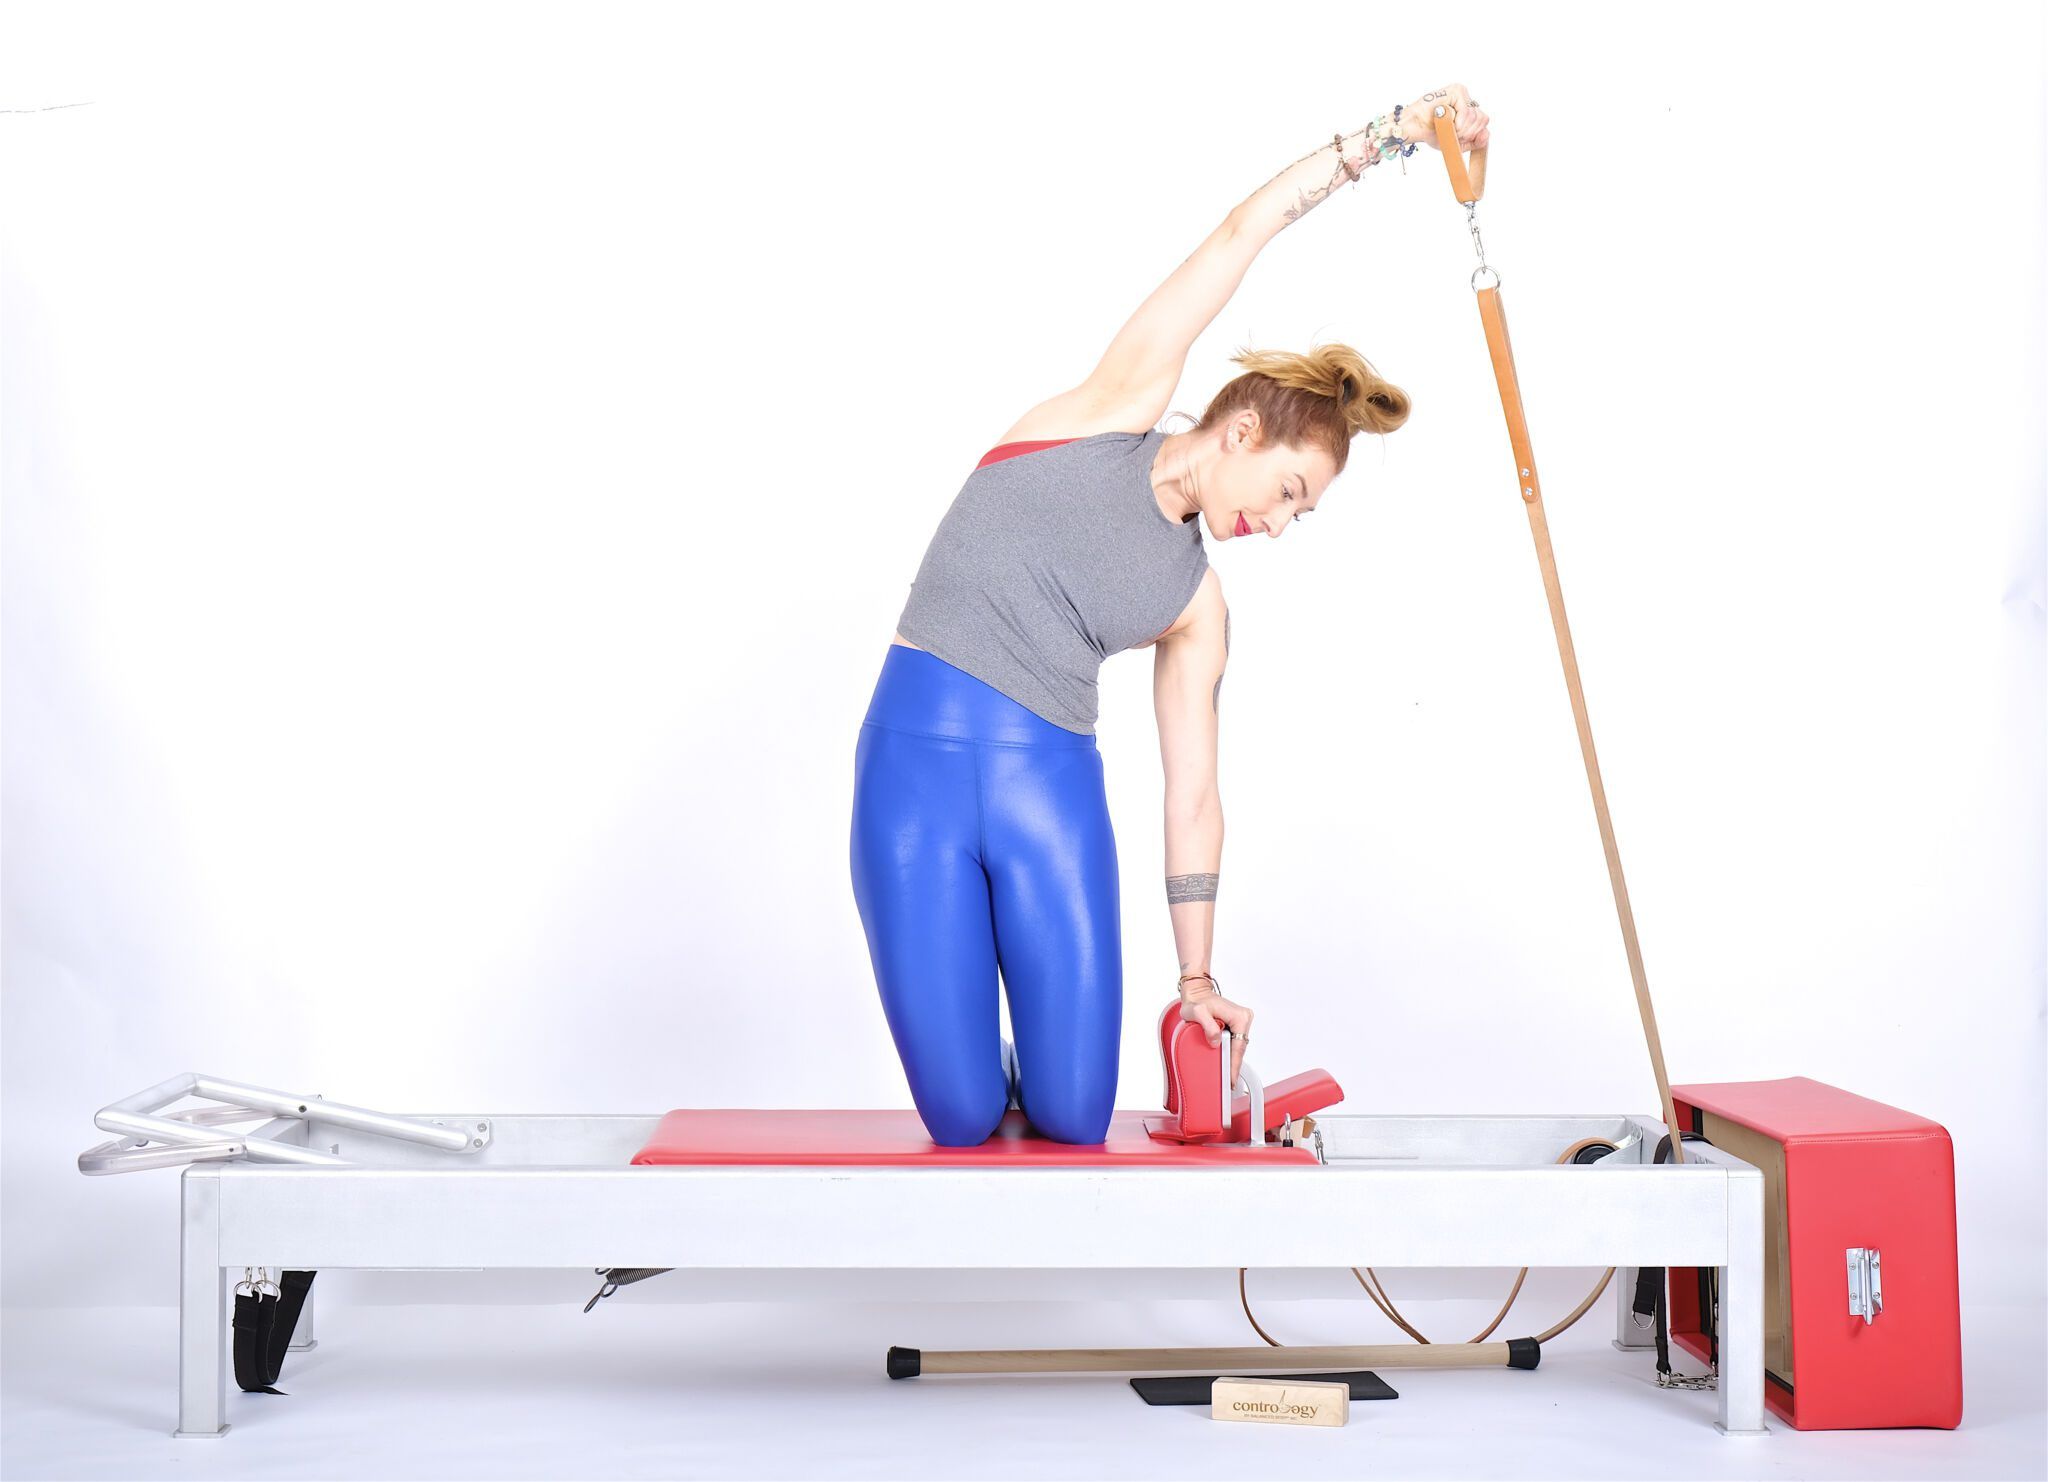 Swakatee on the Reformer - Online Pilates Classes